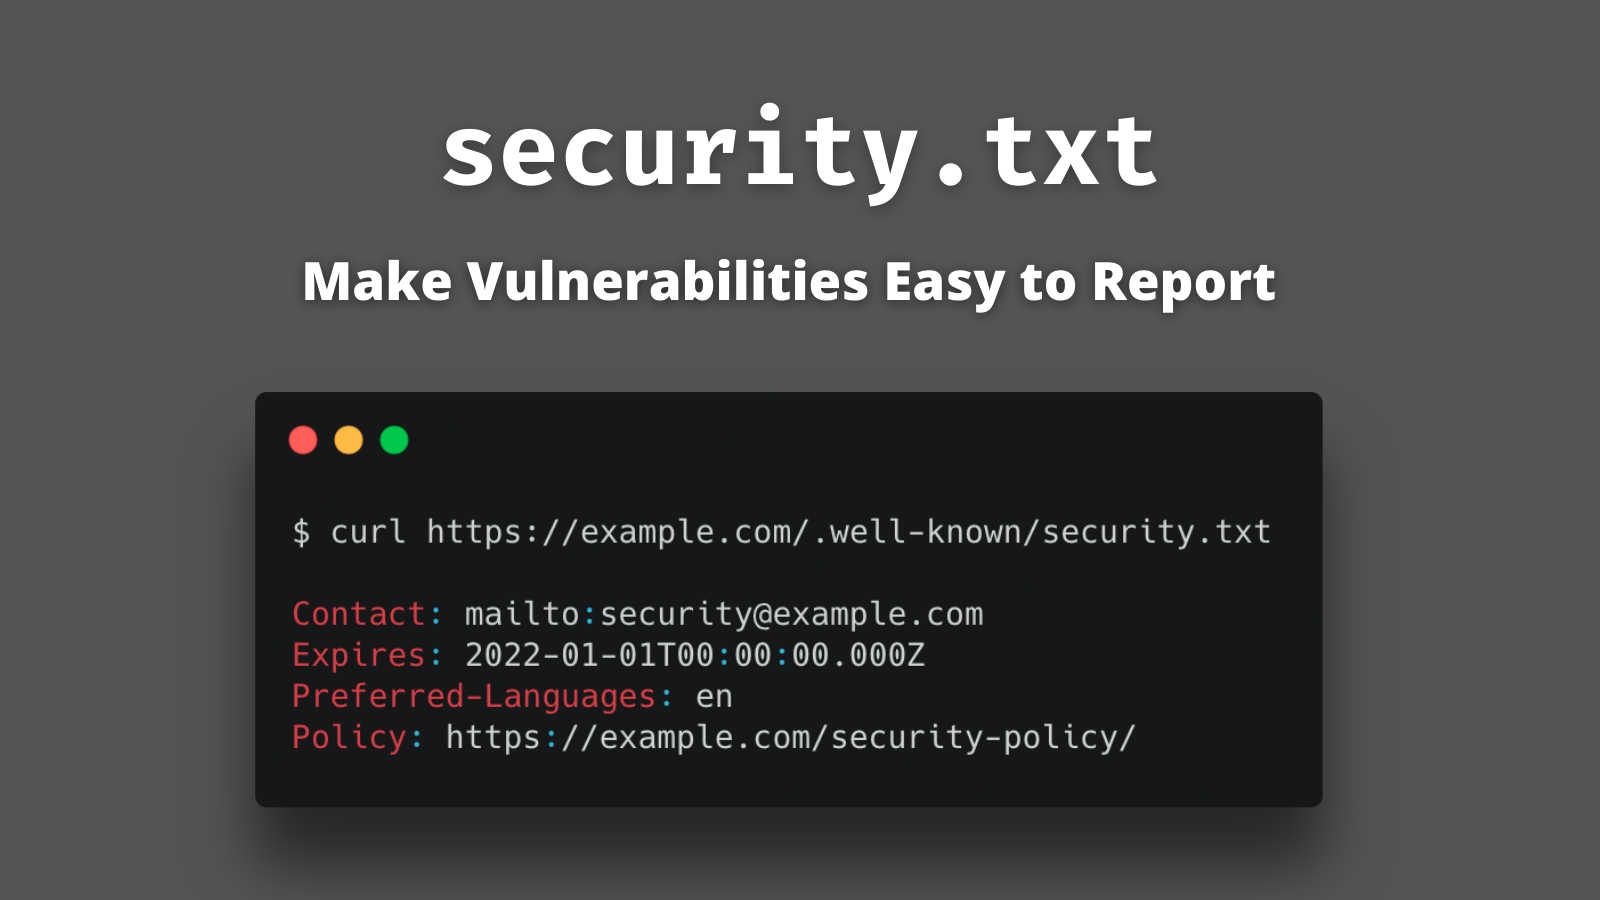 Security.txt: Make Vulnerabilities Easier to Report